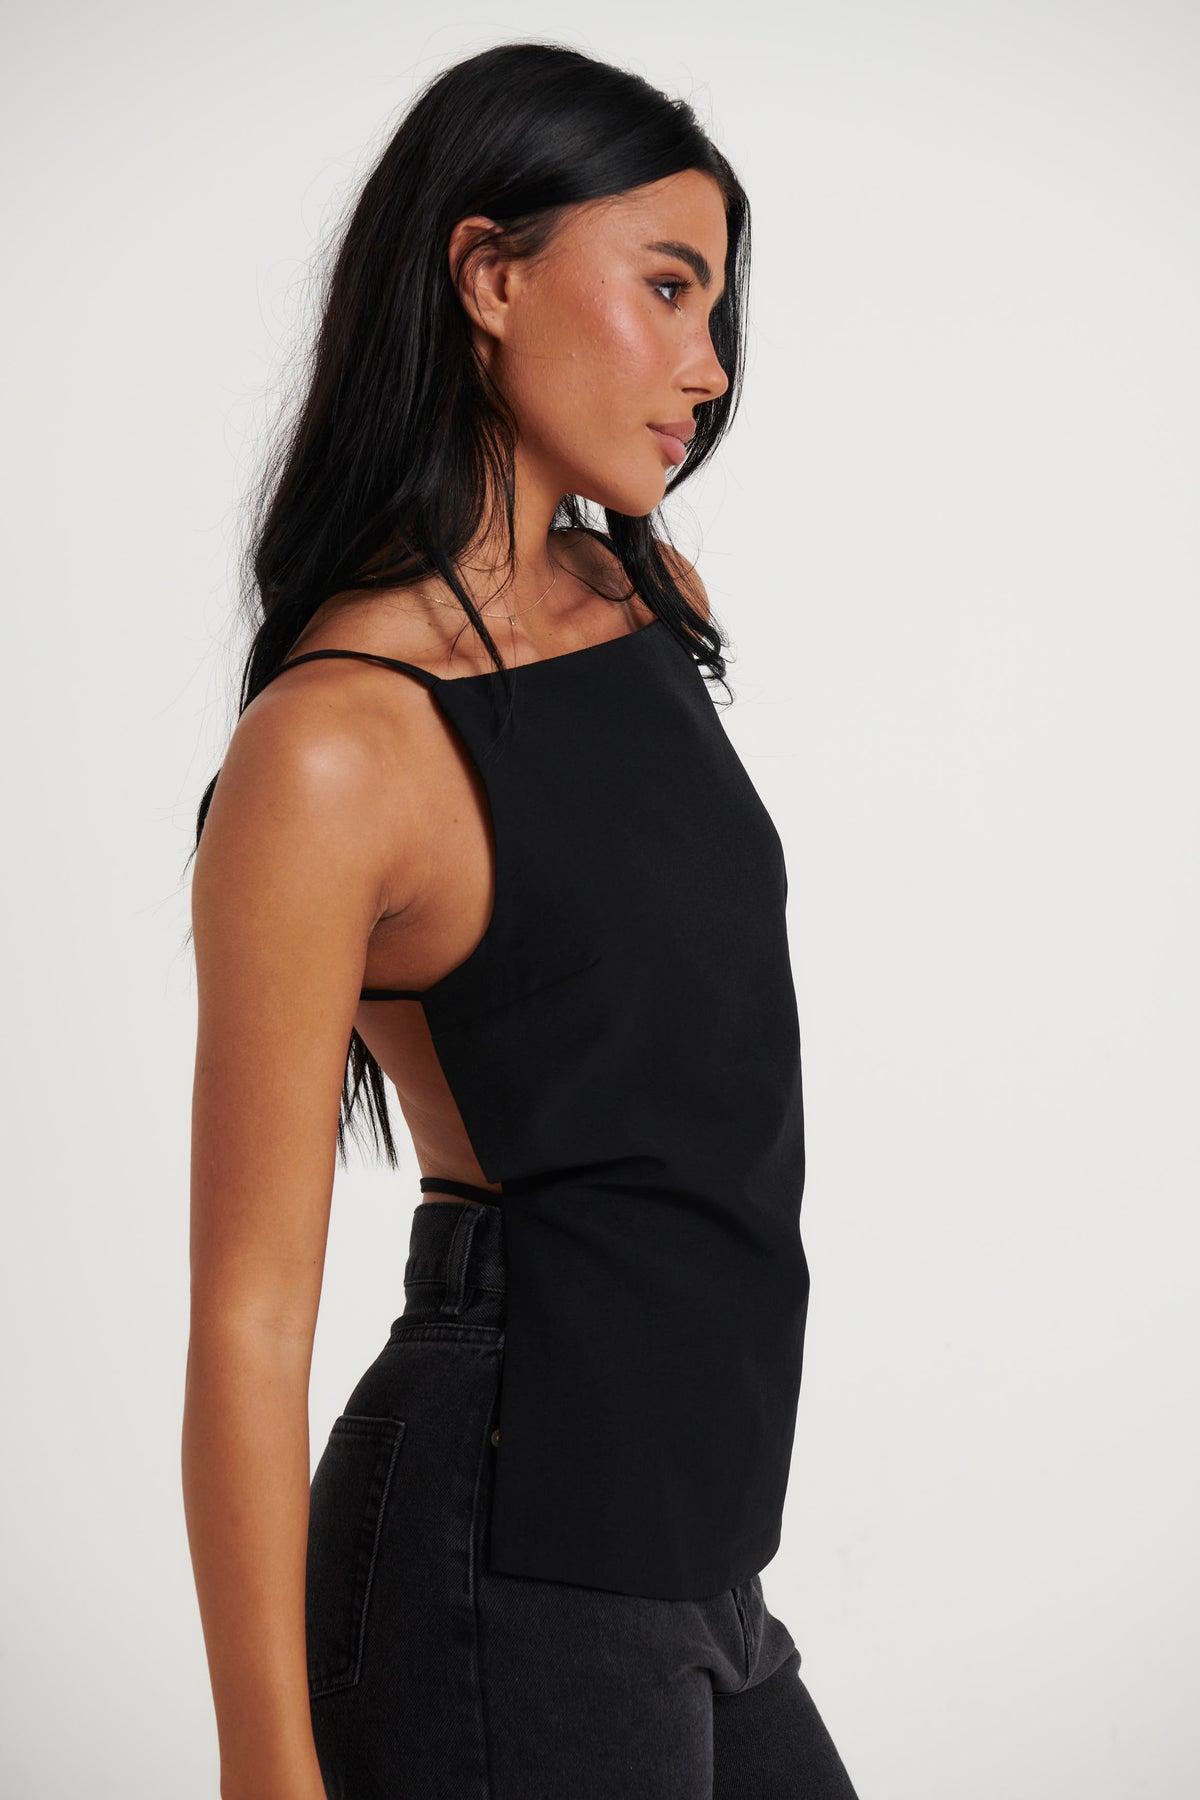 Camille Backless Top Black - FINAL SALE